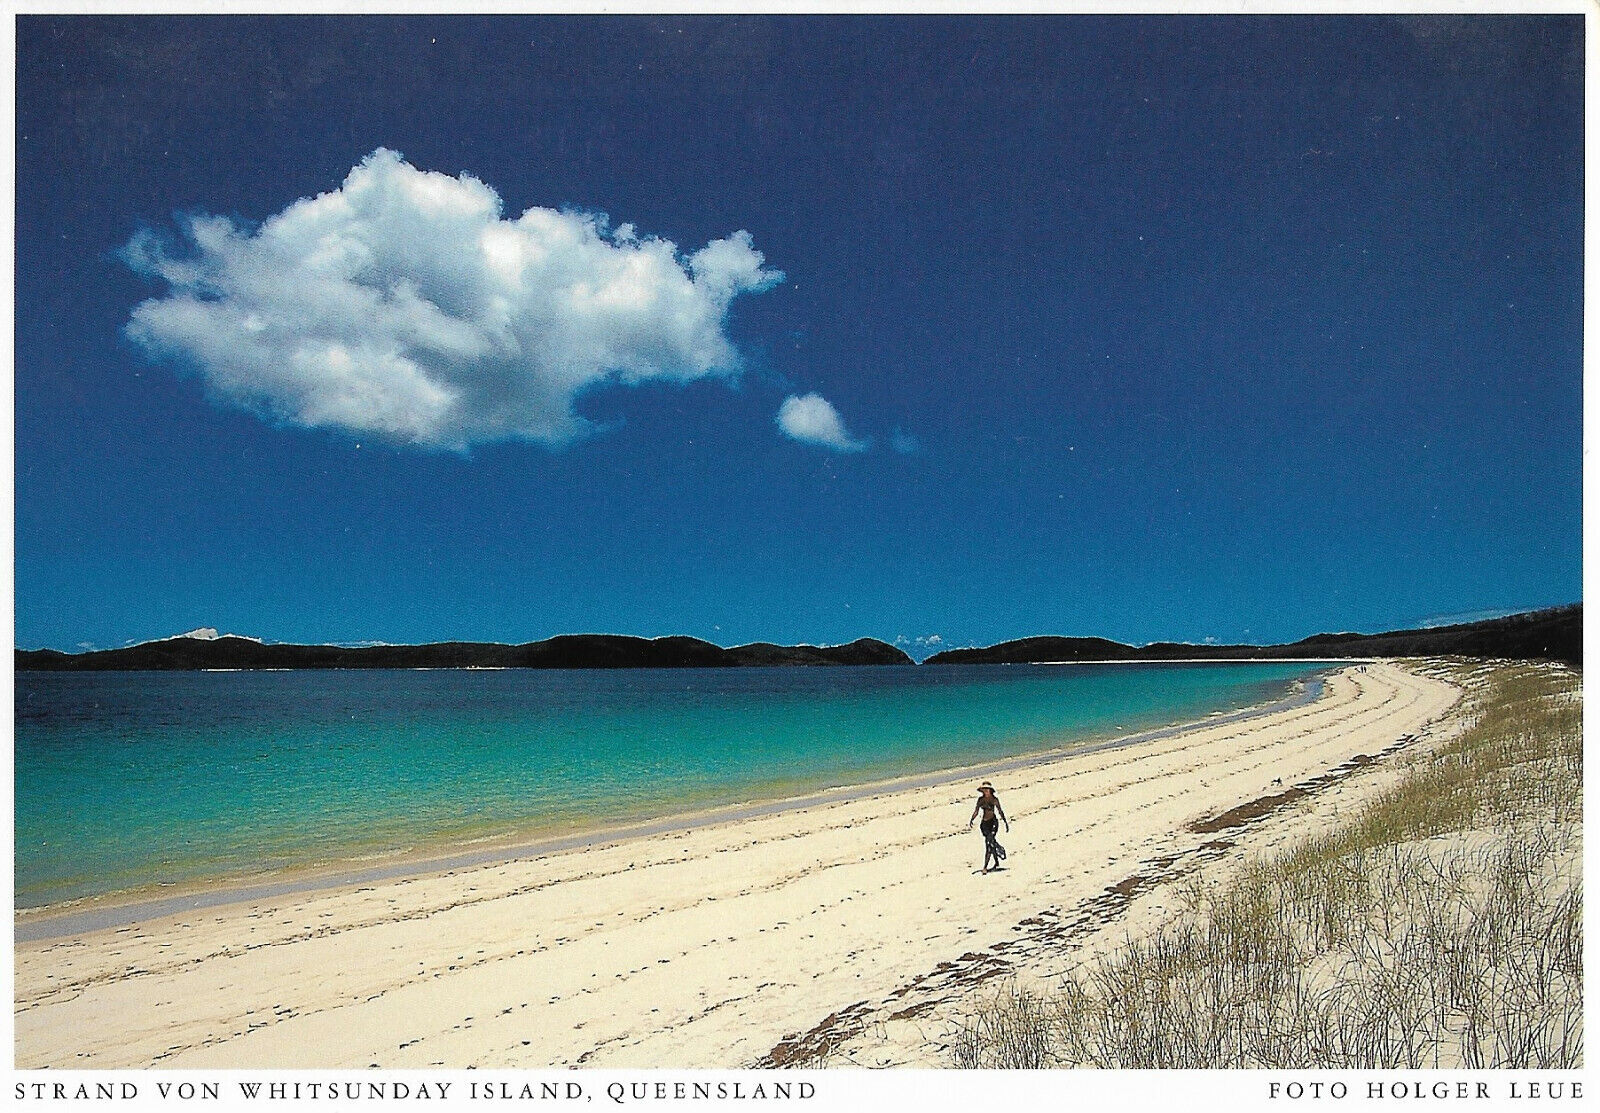 House Clearance - Australia-Whitehaven Beach-View of the beach in the Coral Sea-approx. 1995